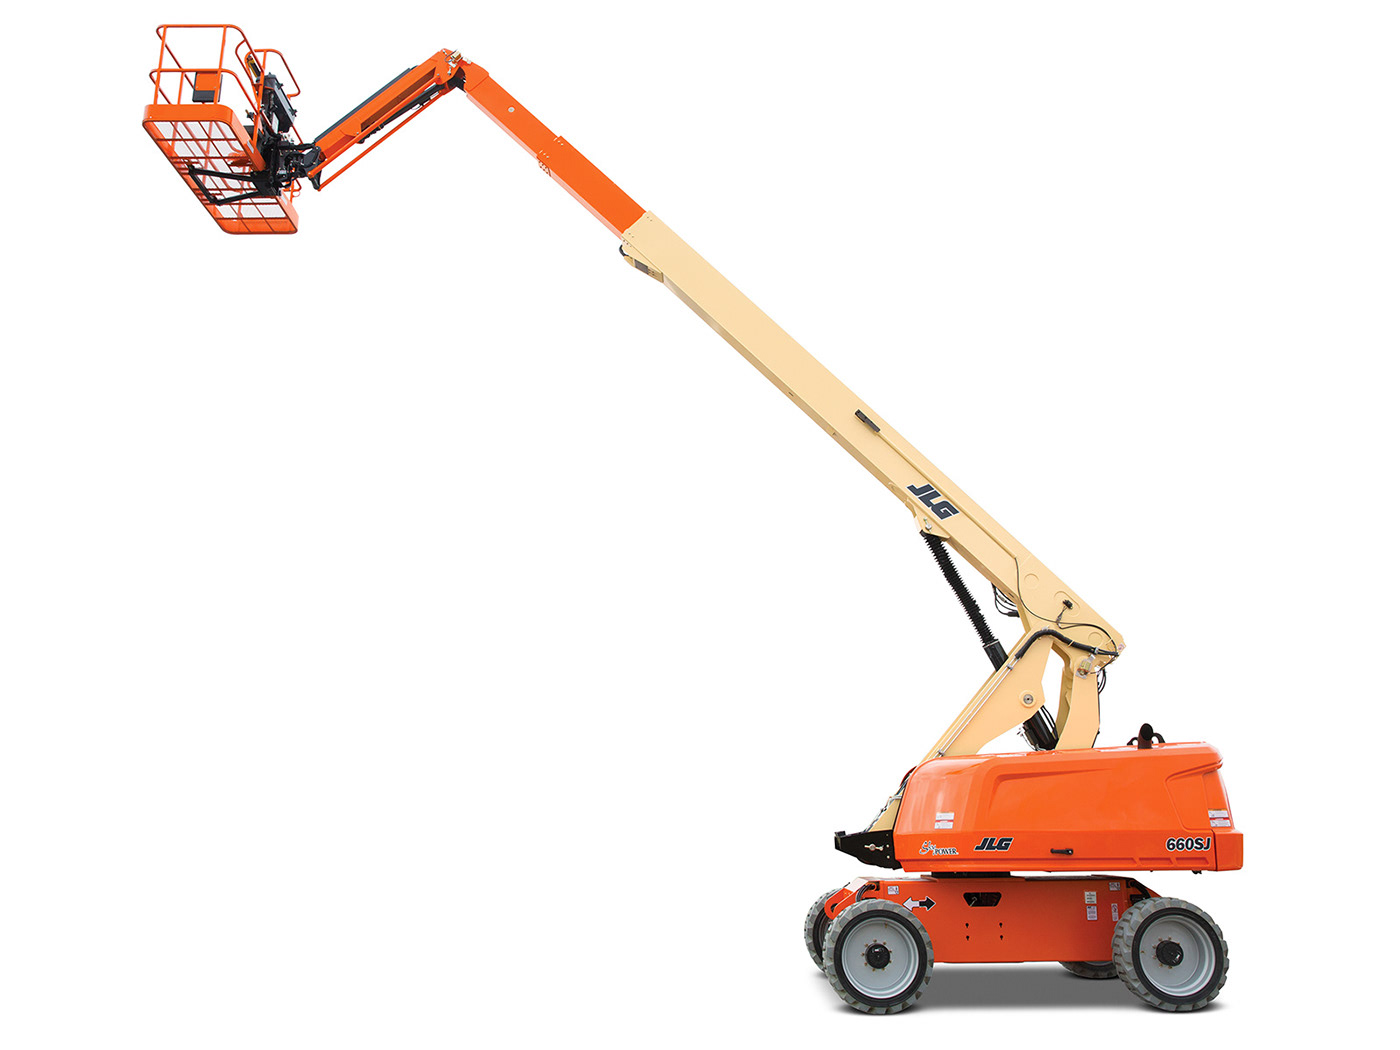 Boom_Lifts_Carlisle_PA Equipment_Rental_In_MD Equipment_Rental_MD Excavators_Gardners_PA Forklifts_Palmyra_PA Rent_Equip_Shippensburg Scissor_Lifts_Newville_PA Skid_Loaders_Hanover_PA